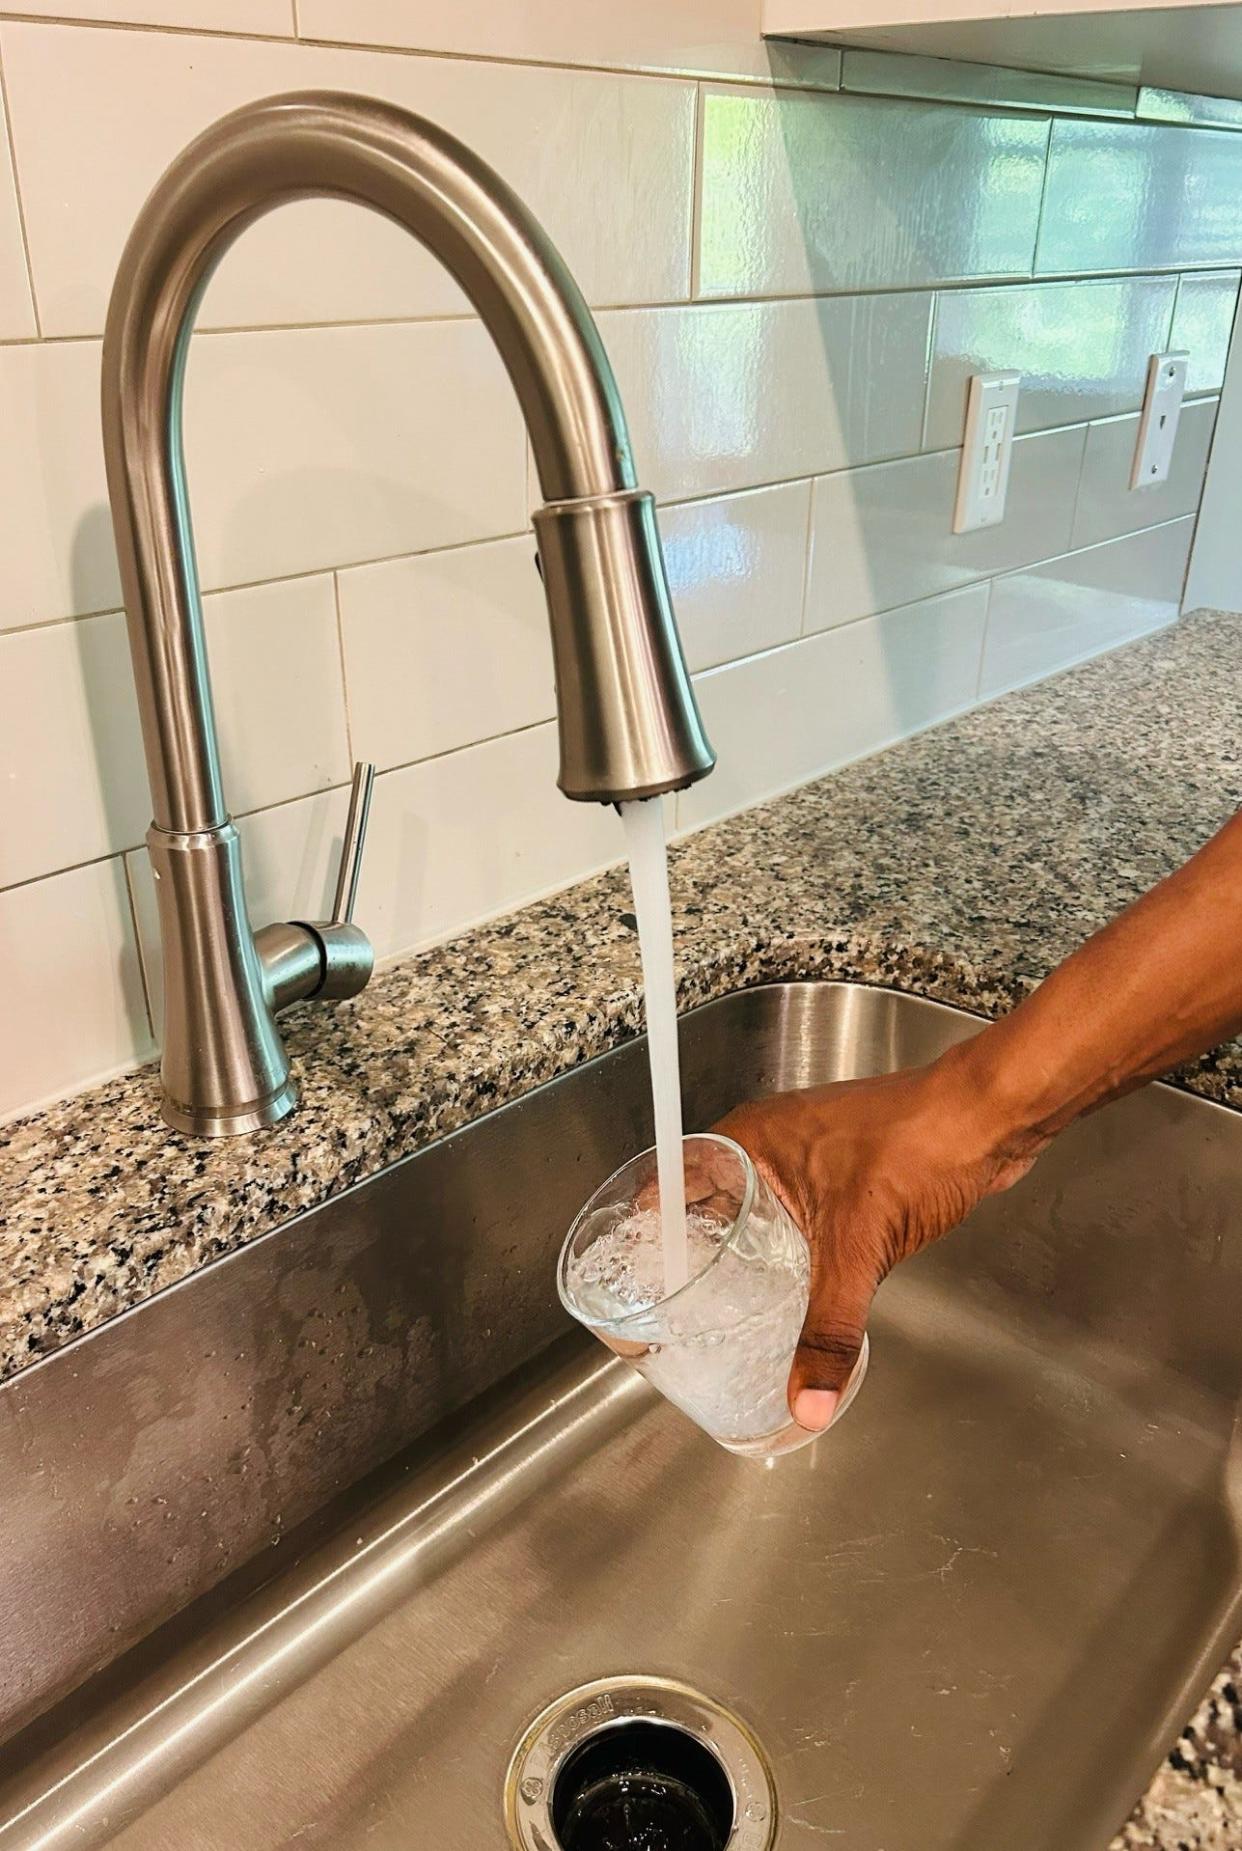 As part of the Biden Administration’s commitment to combating PFAS pollution, the Environmental Protection Agency received $1billion federal funding through to address PFAS in drinking water.